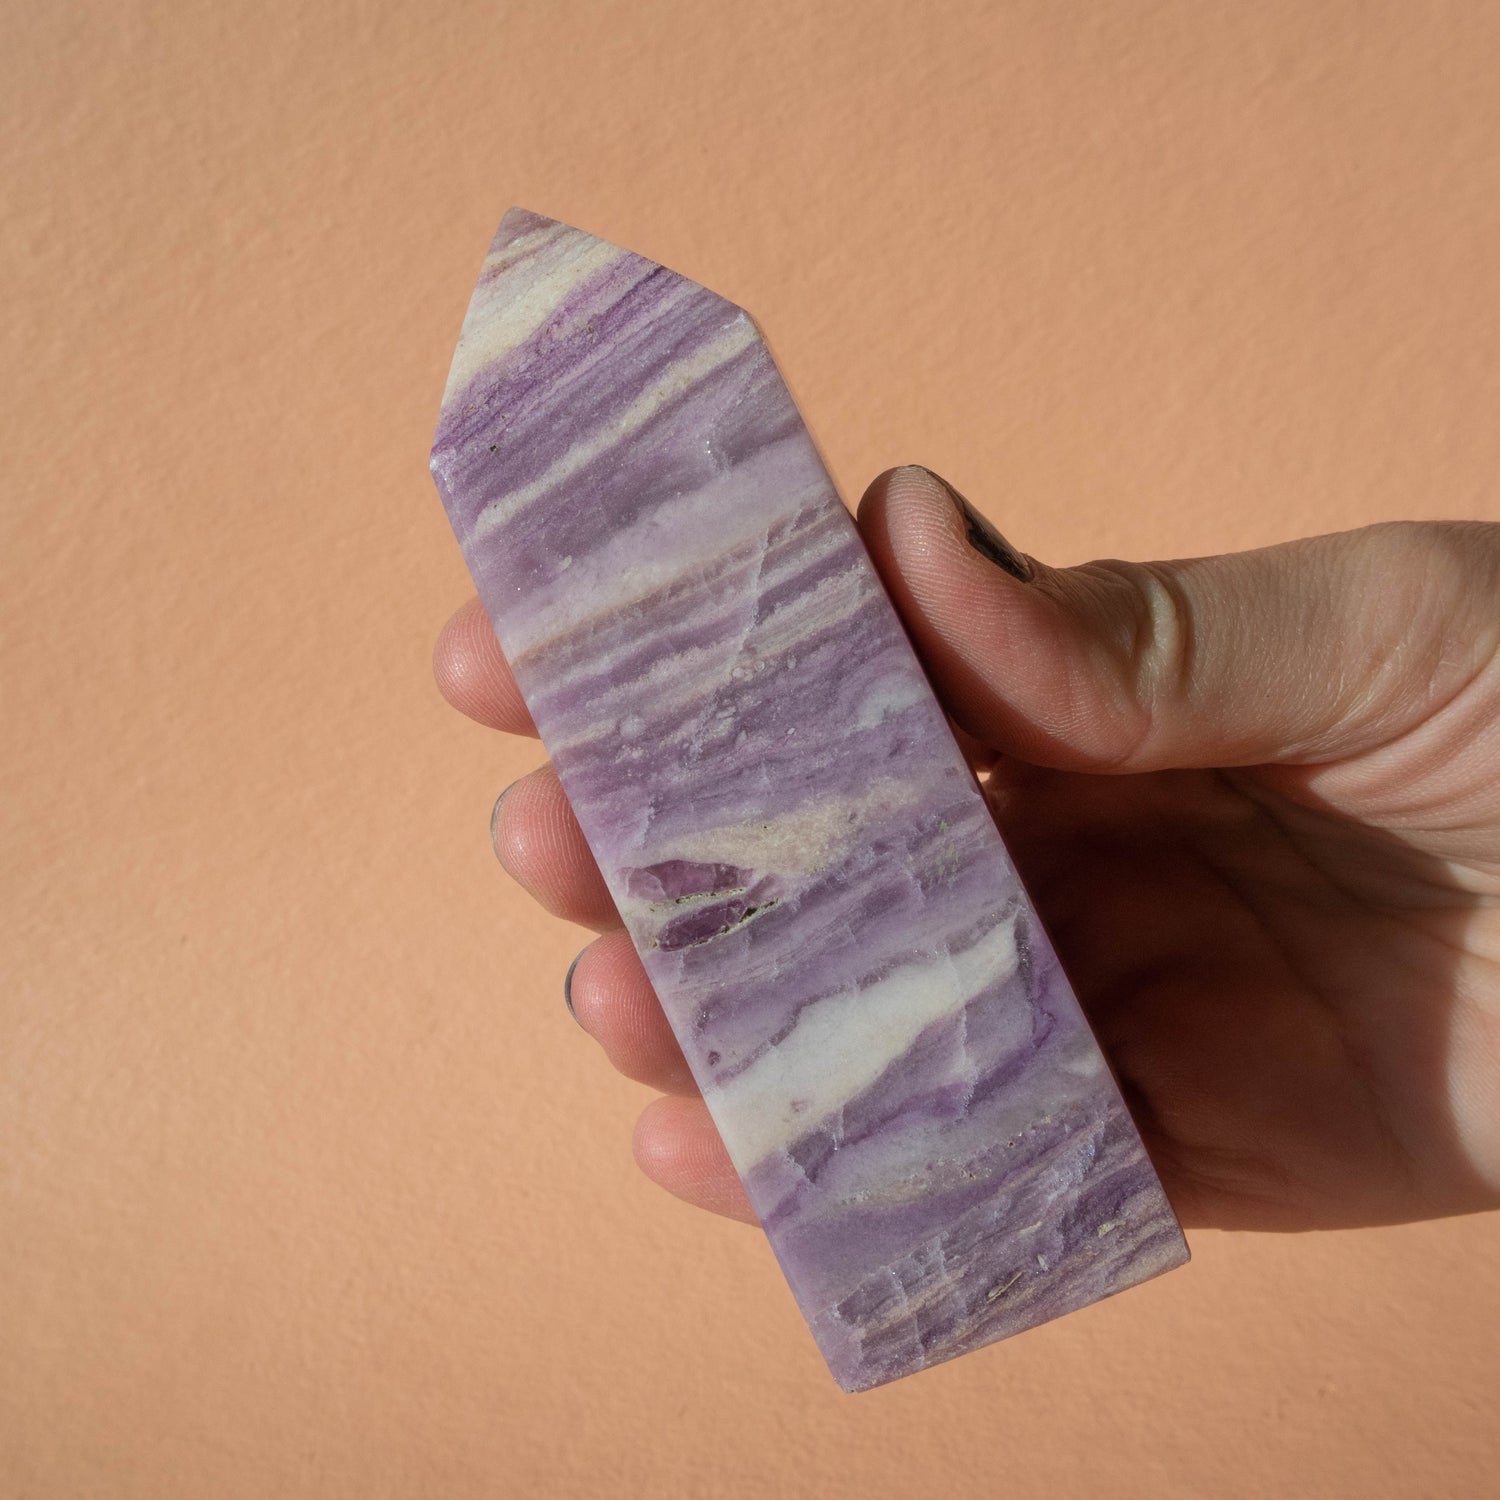 fluorite, silky fluorite, velvet fluorite, silky fluorite tower, crystal tower, gemstone tower, silky fluorite crystal, silky fluorite stone, silky fluorite properties, silky fluorite healing properties, silky fluorite meaning, velvet fluorite properties, fluorite crystal, fluorite properties, fluorite meaning